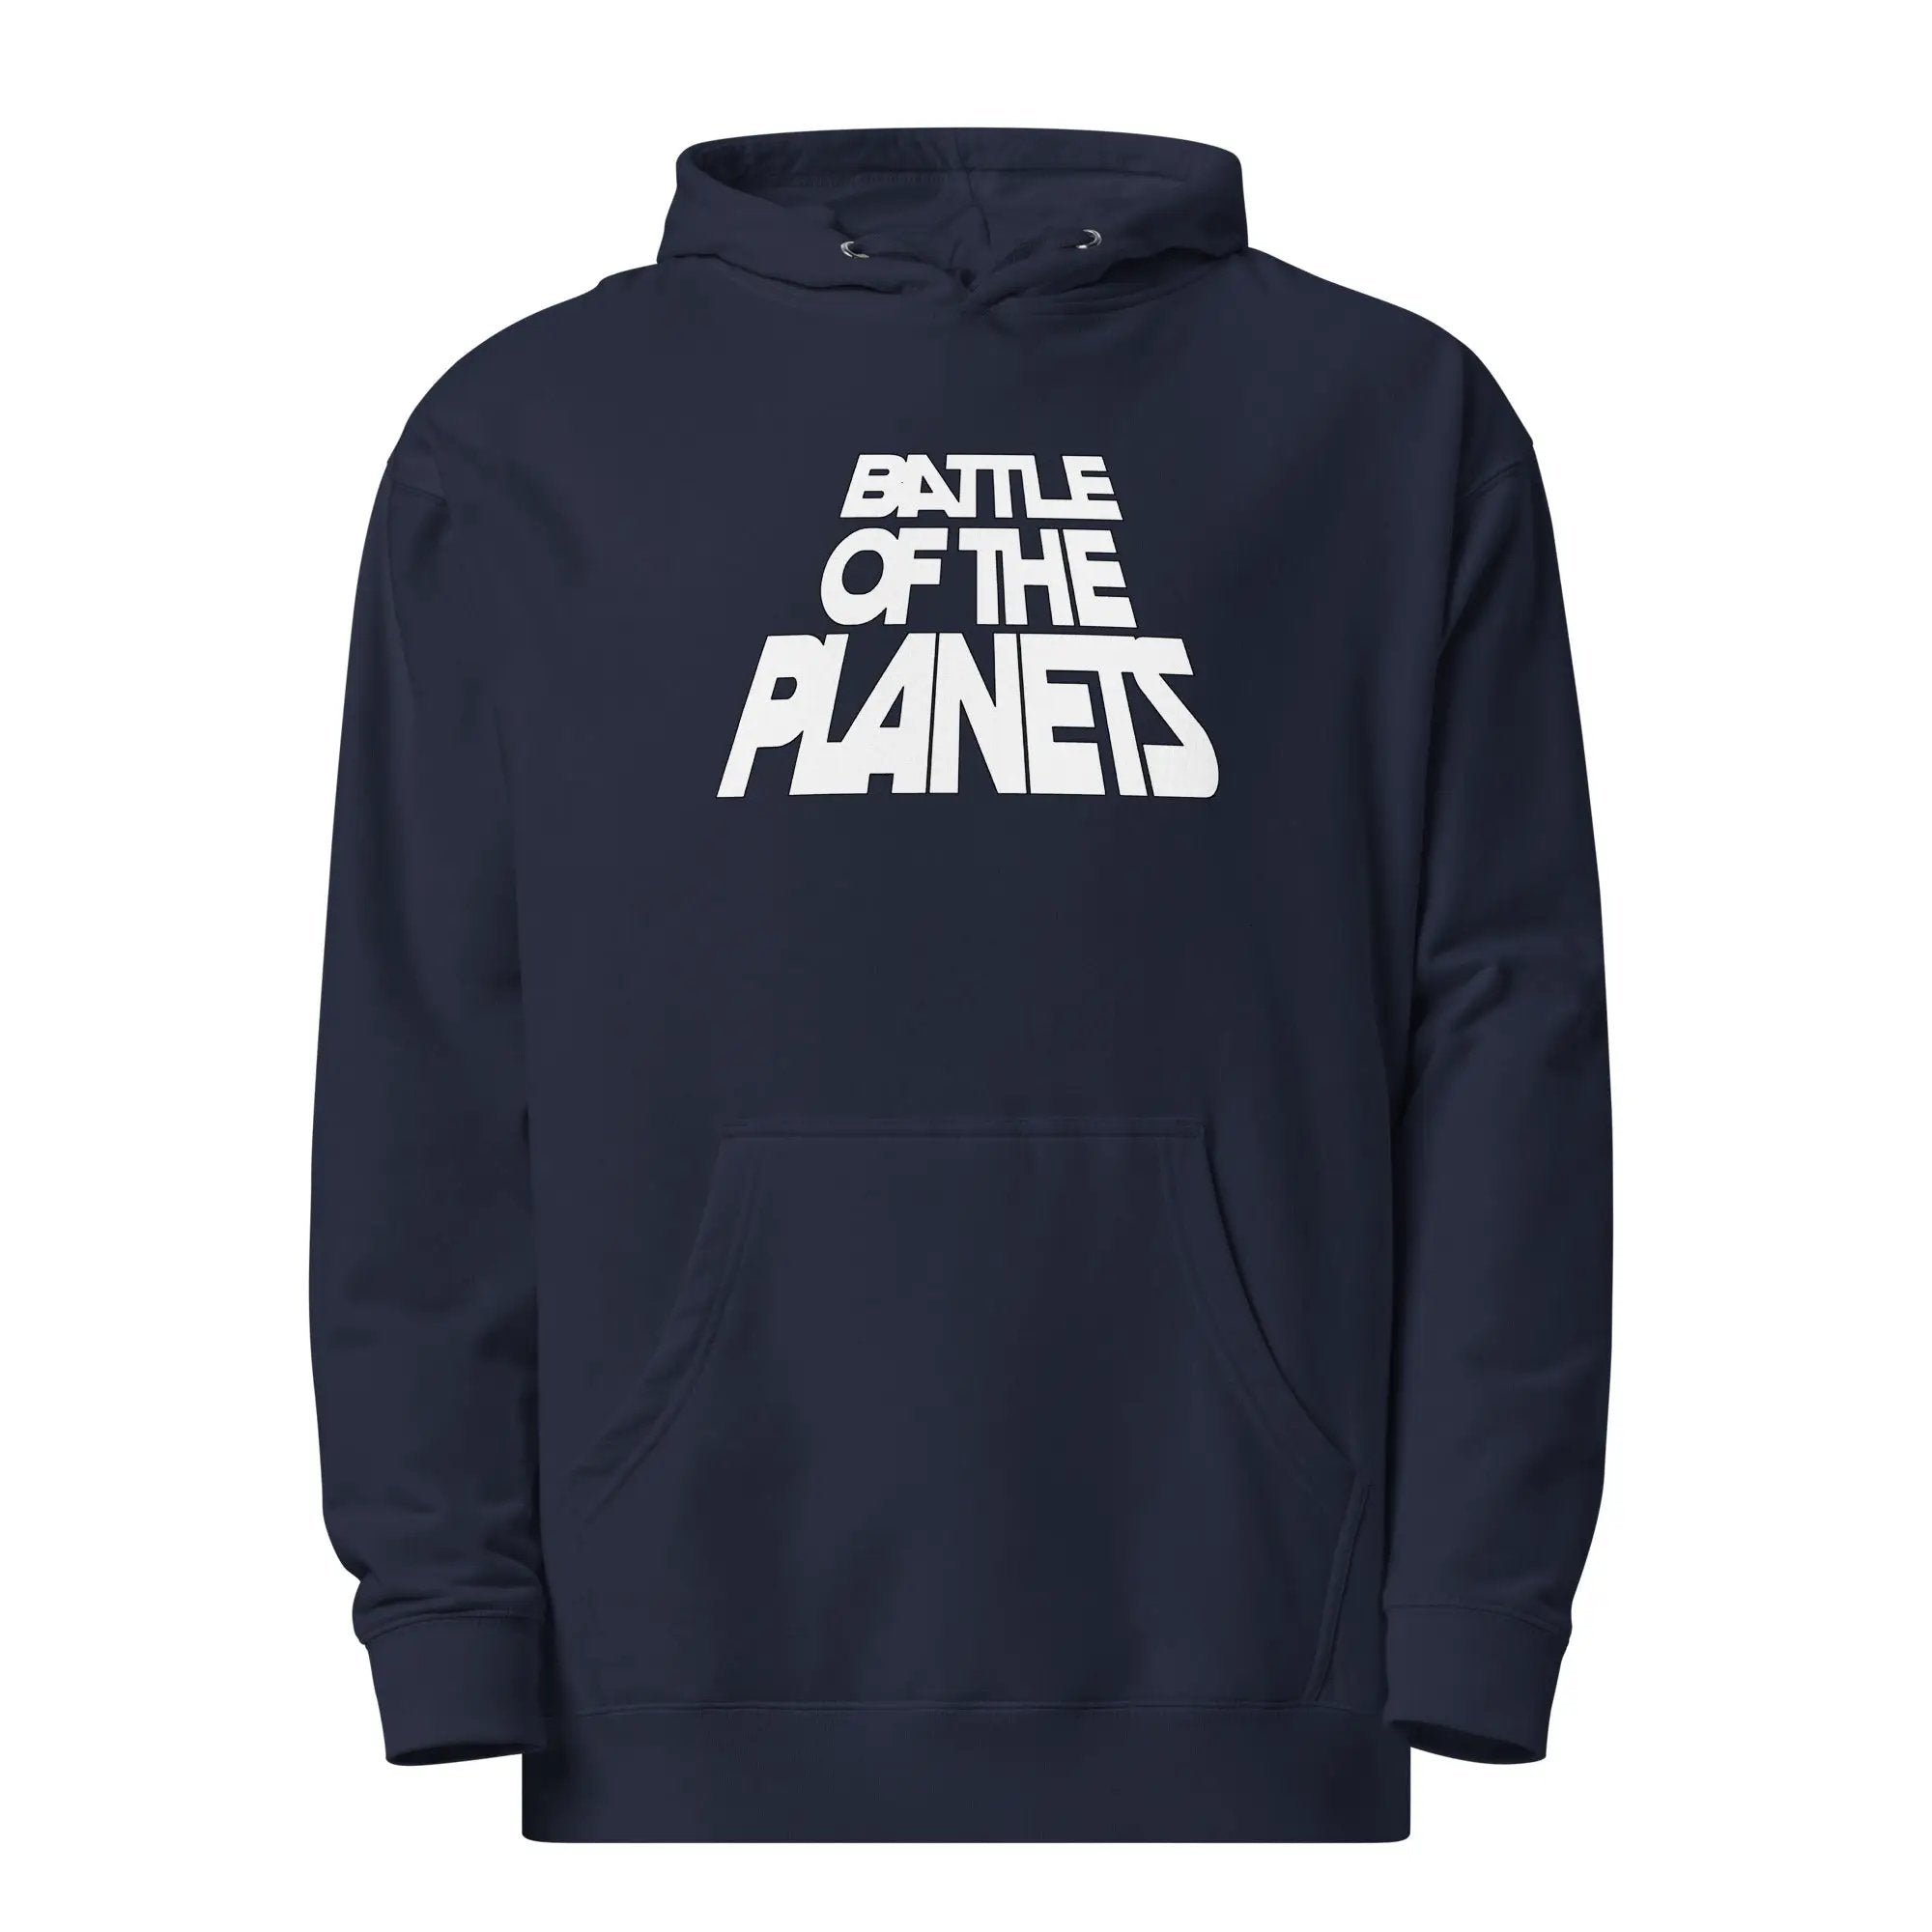 Battle Of The Planets Unisex midweight hoodie